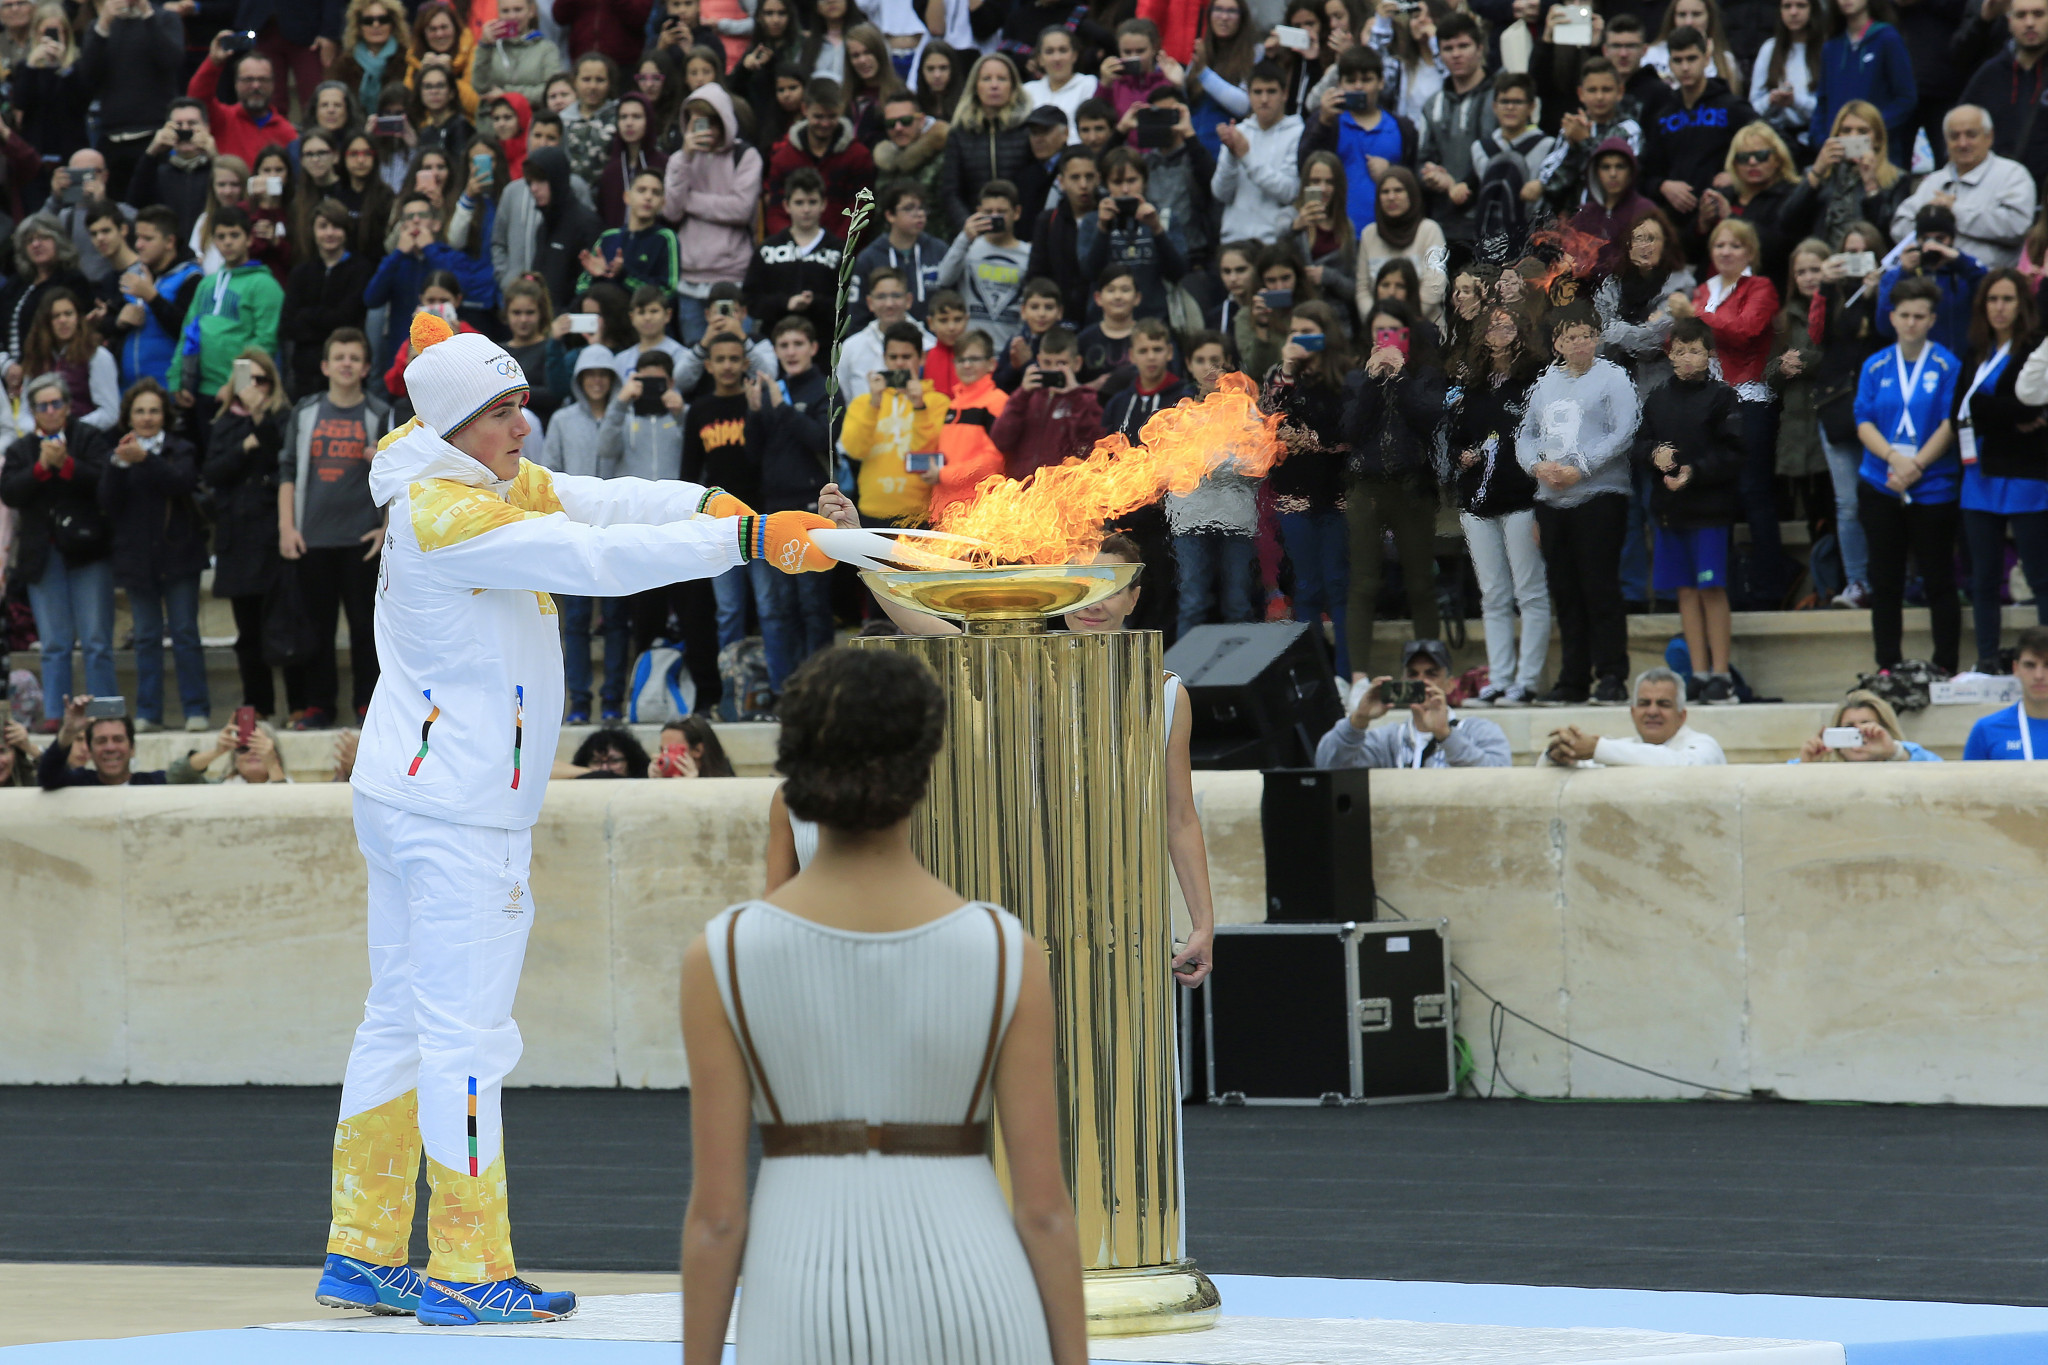 Skier Ioannis Proios lights the Olympic flame during today's ceremony ©Getty Images